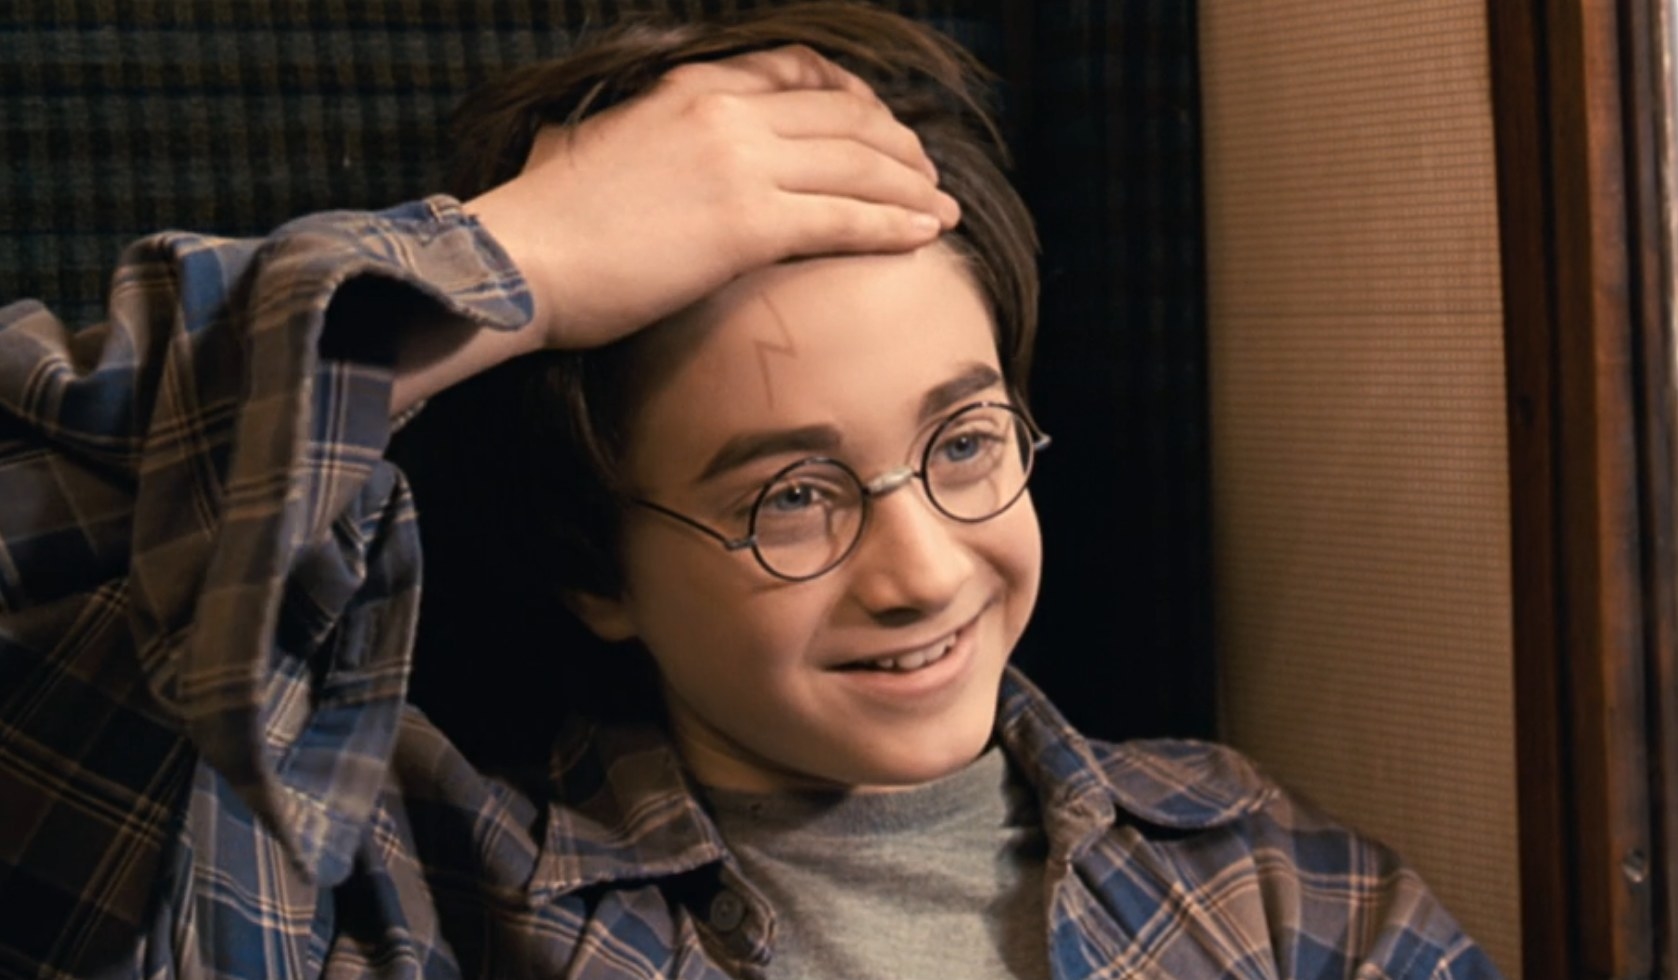 Daniel Radcliffe as Harry Potter shows Ron the scar on his forehead